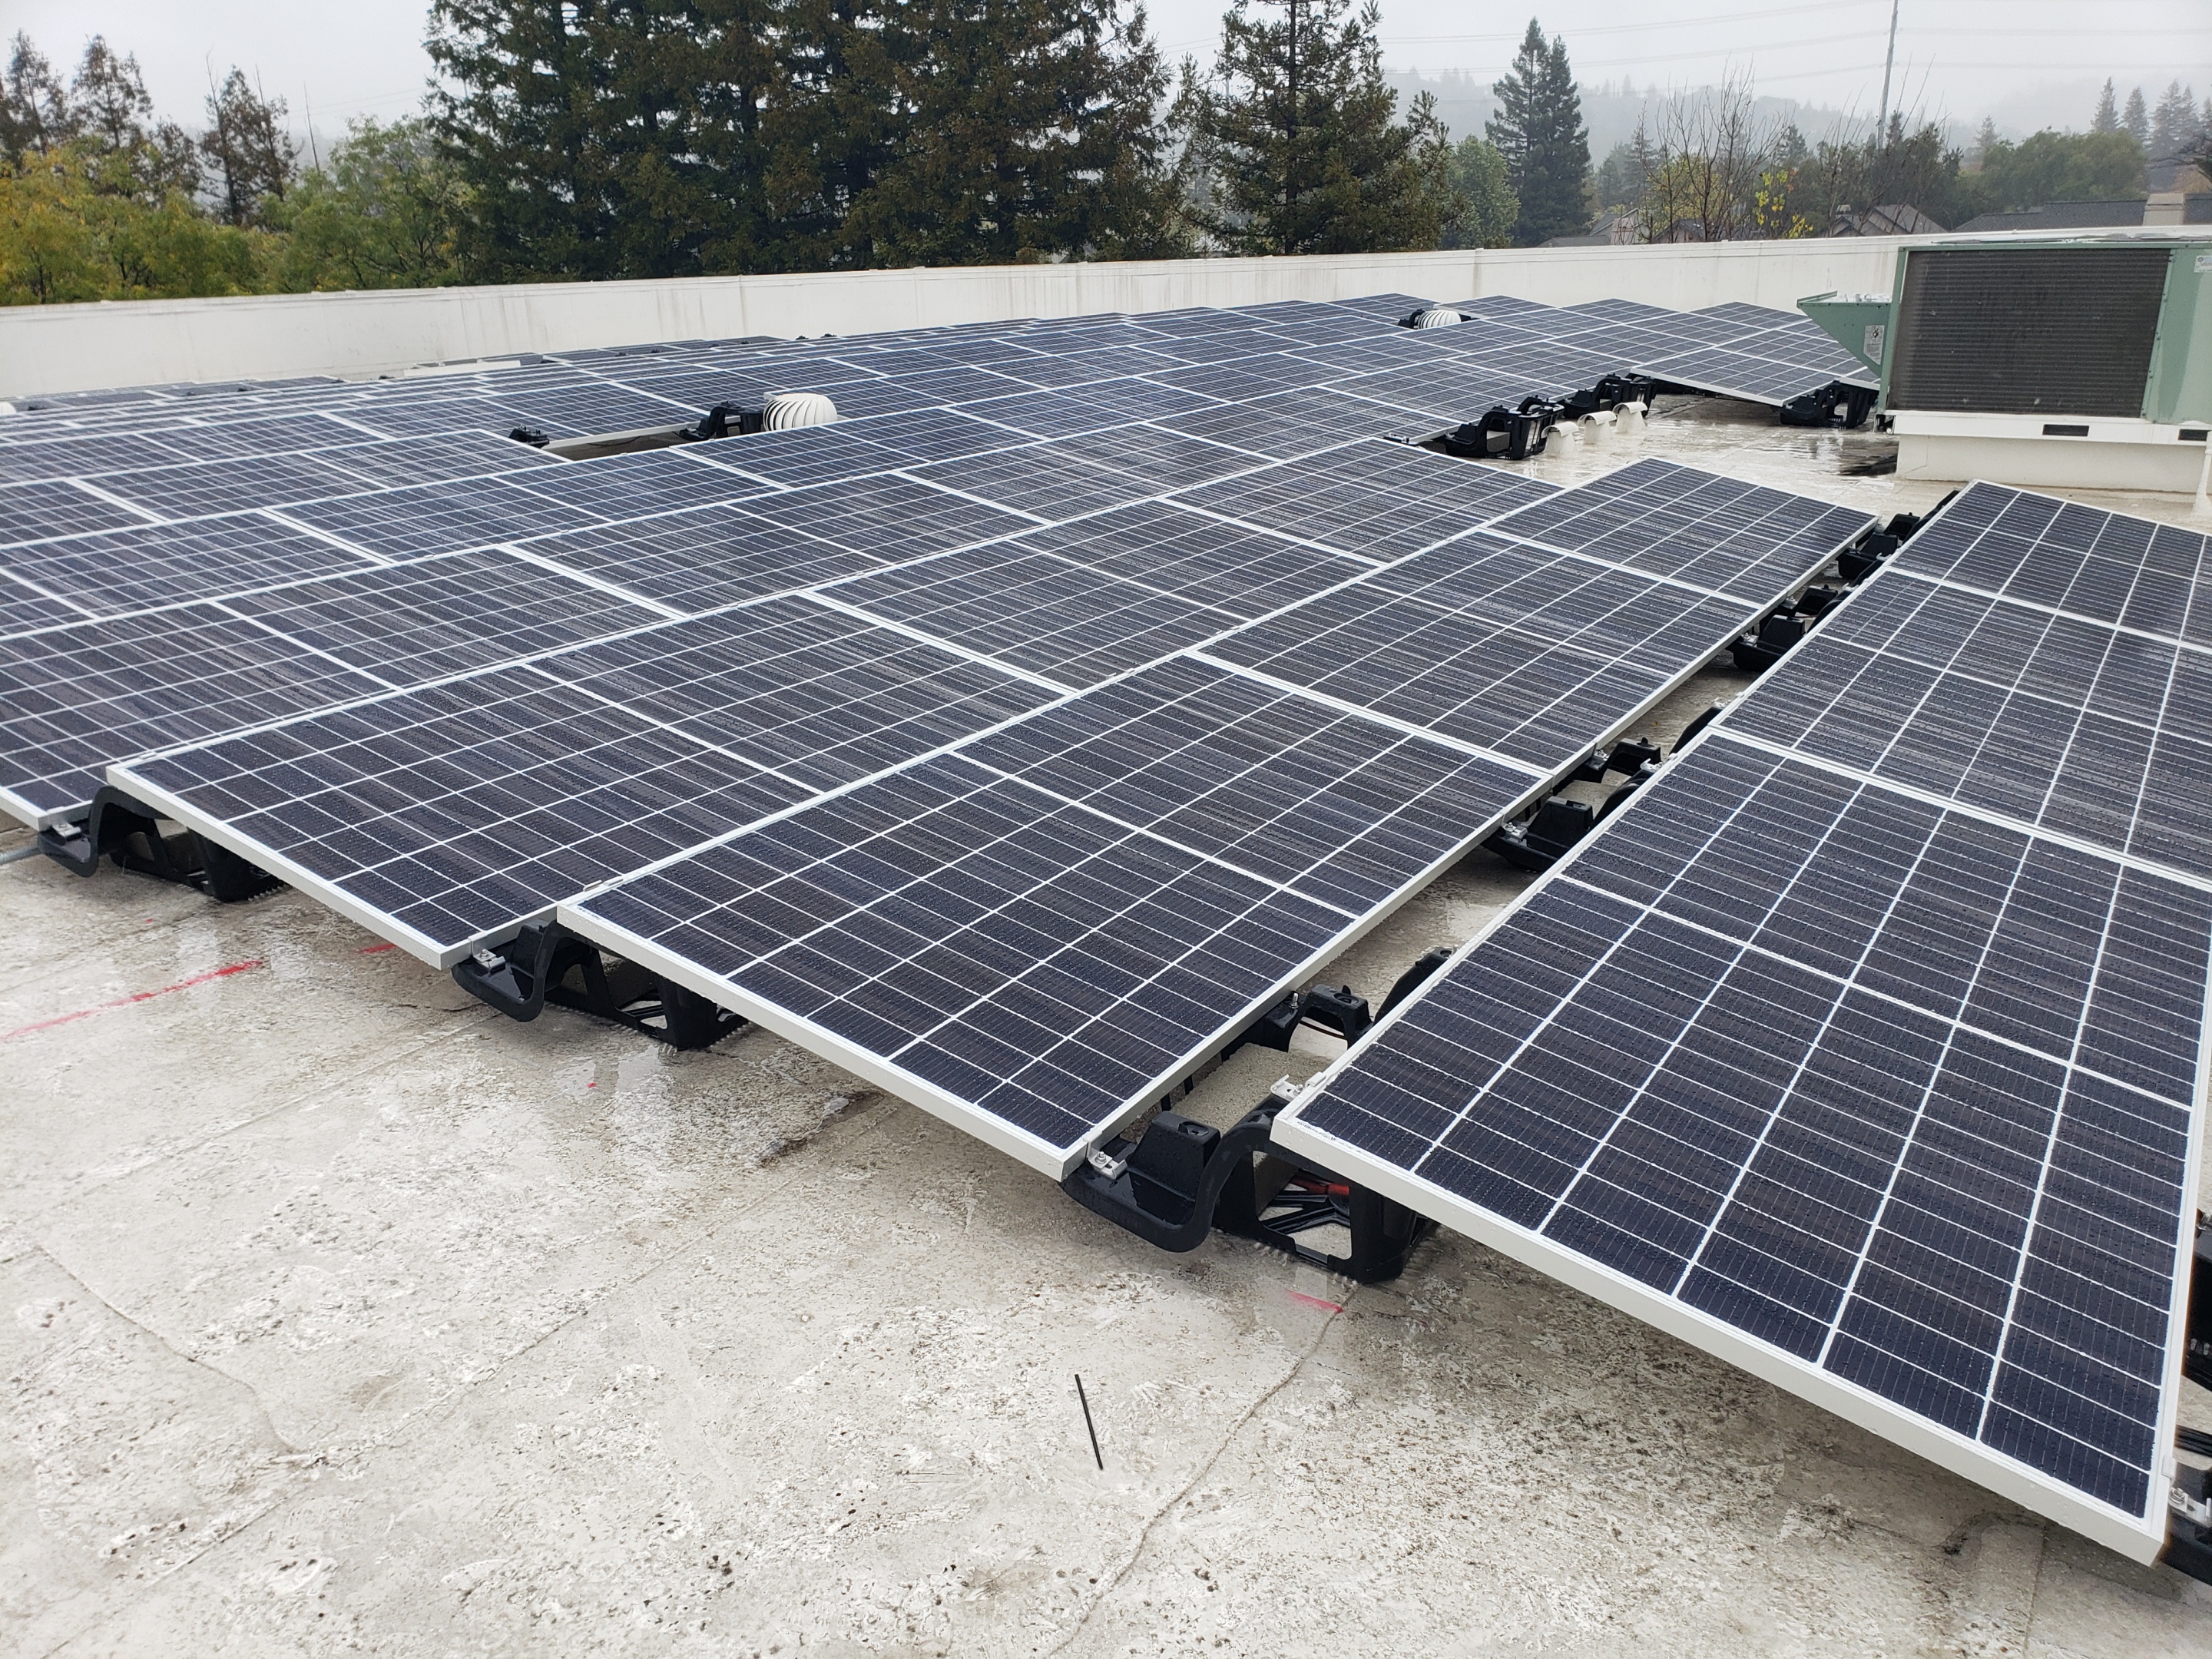 SolarCraft Completes Solar Power Installation at California Indian Museum & Cultural Center - Sonoma County Museum Installs Solar and Cuts Utility Bills